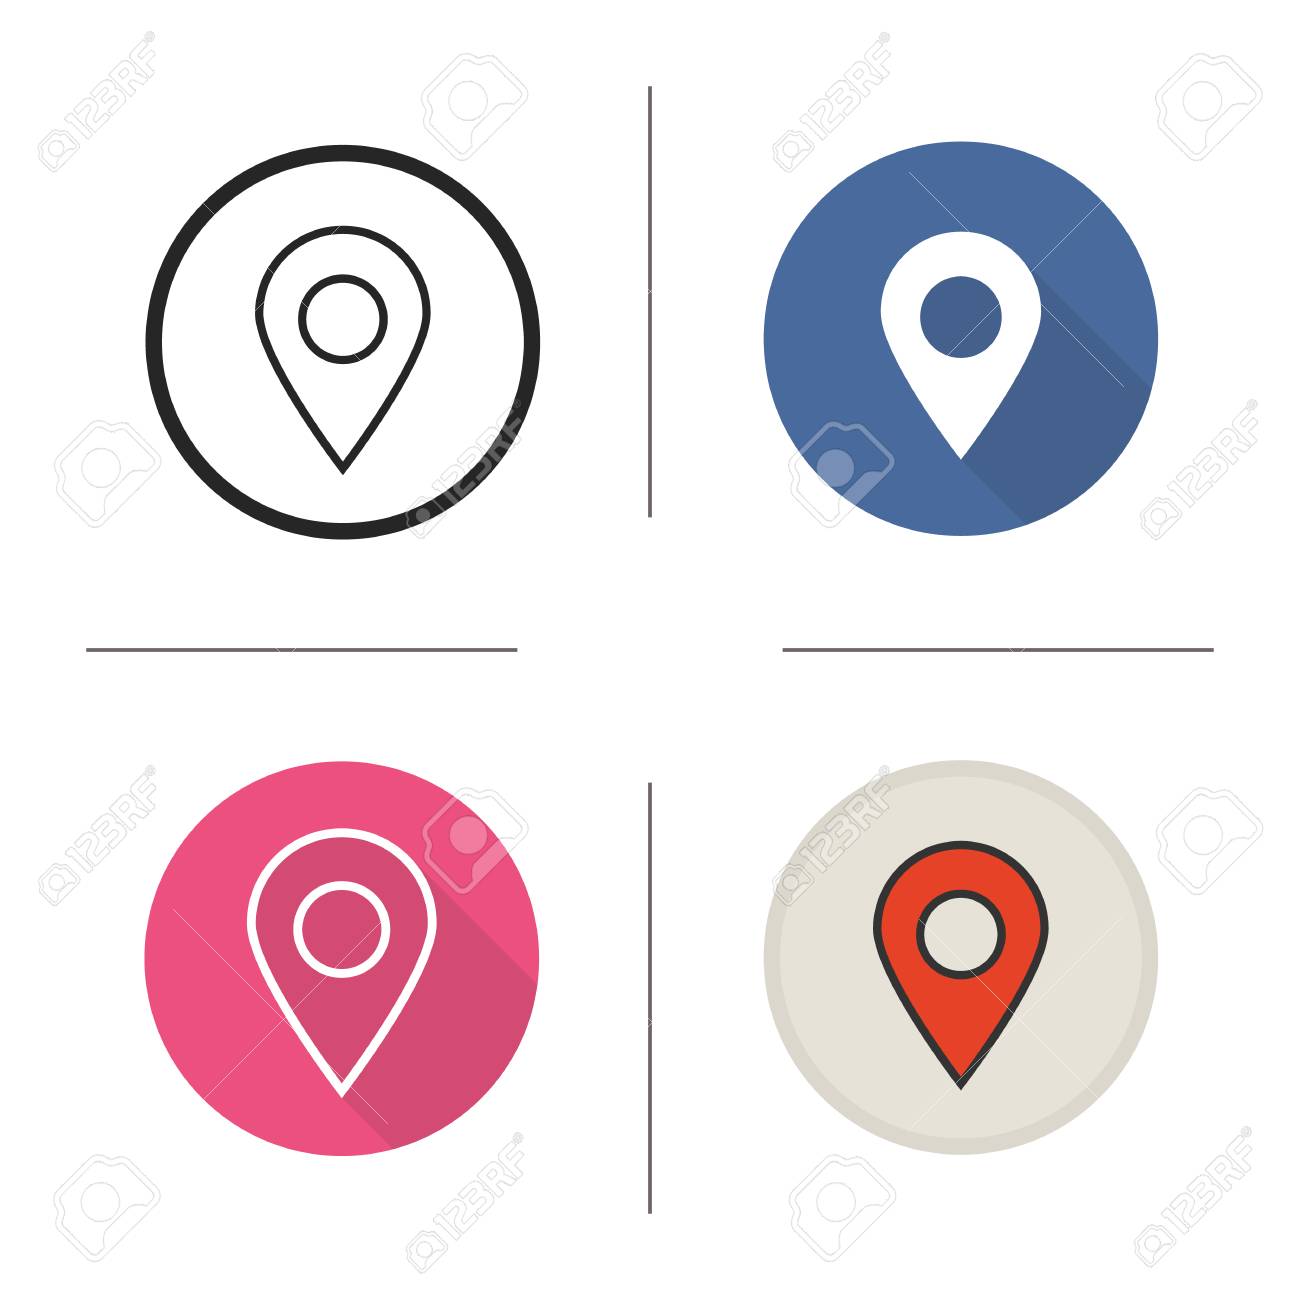 Map Pinpoint Icon - free download, PNG and vector